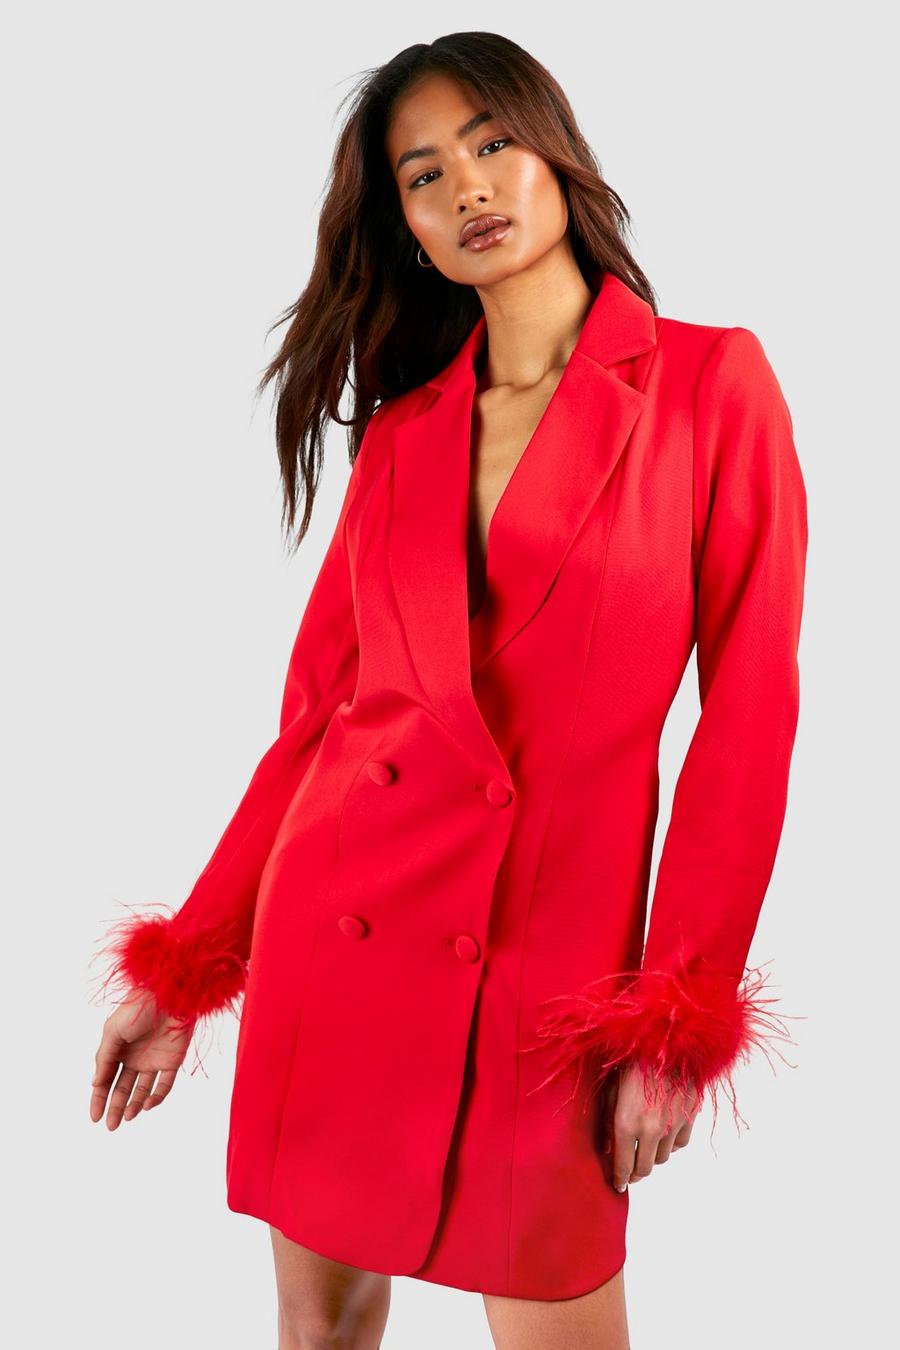 Red Sequin High Neck Feather Detail Party Dress